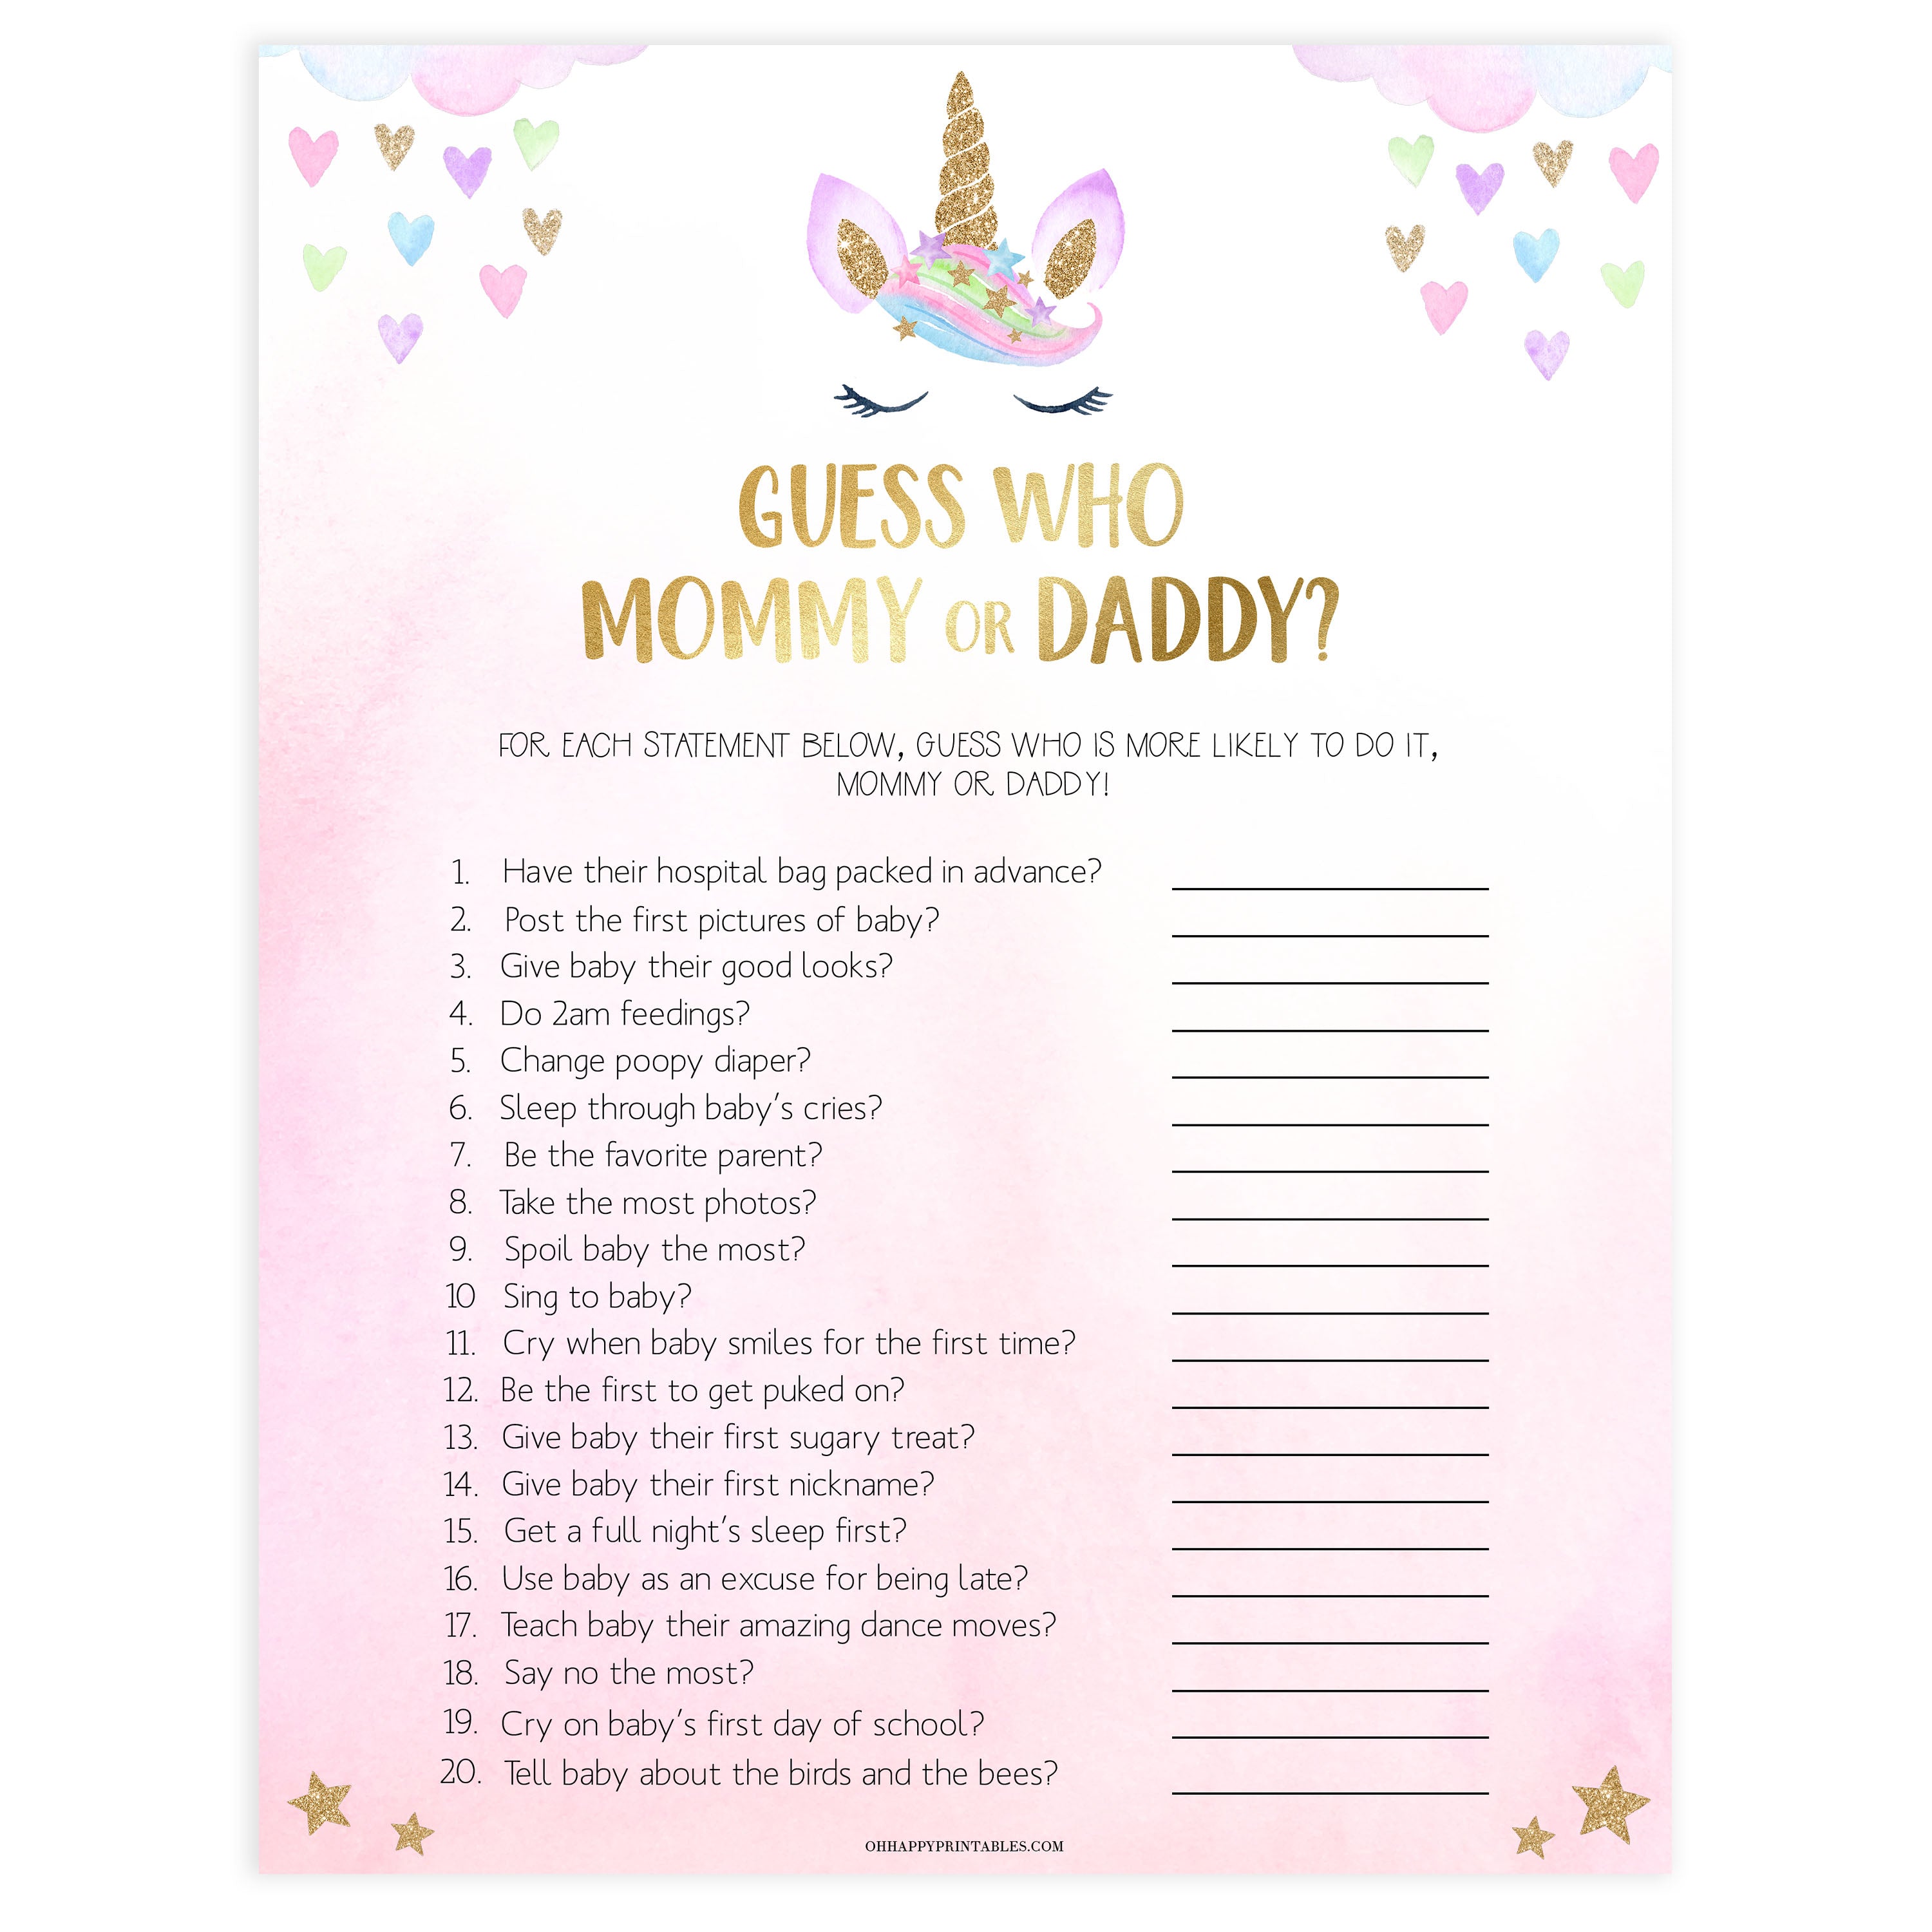 guess who said it baby game, Printable baby shower games, unicorn baby games, baby shower games, fun baby shower ideas, top baby shower ideas, unicorn baby shower, baby shower games, fun unicorn baby shower ideas